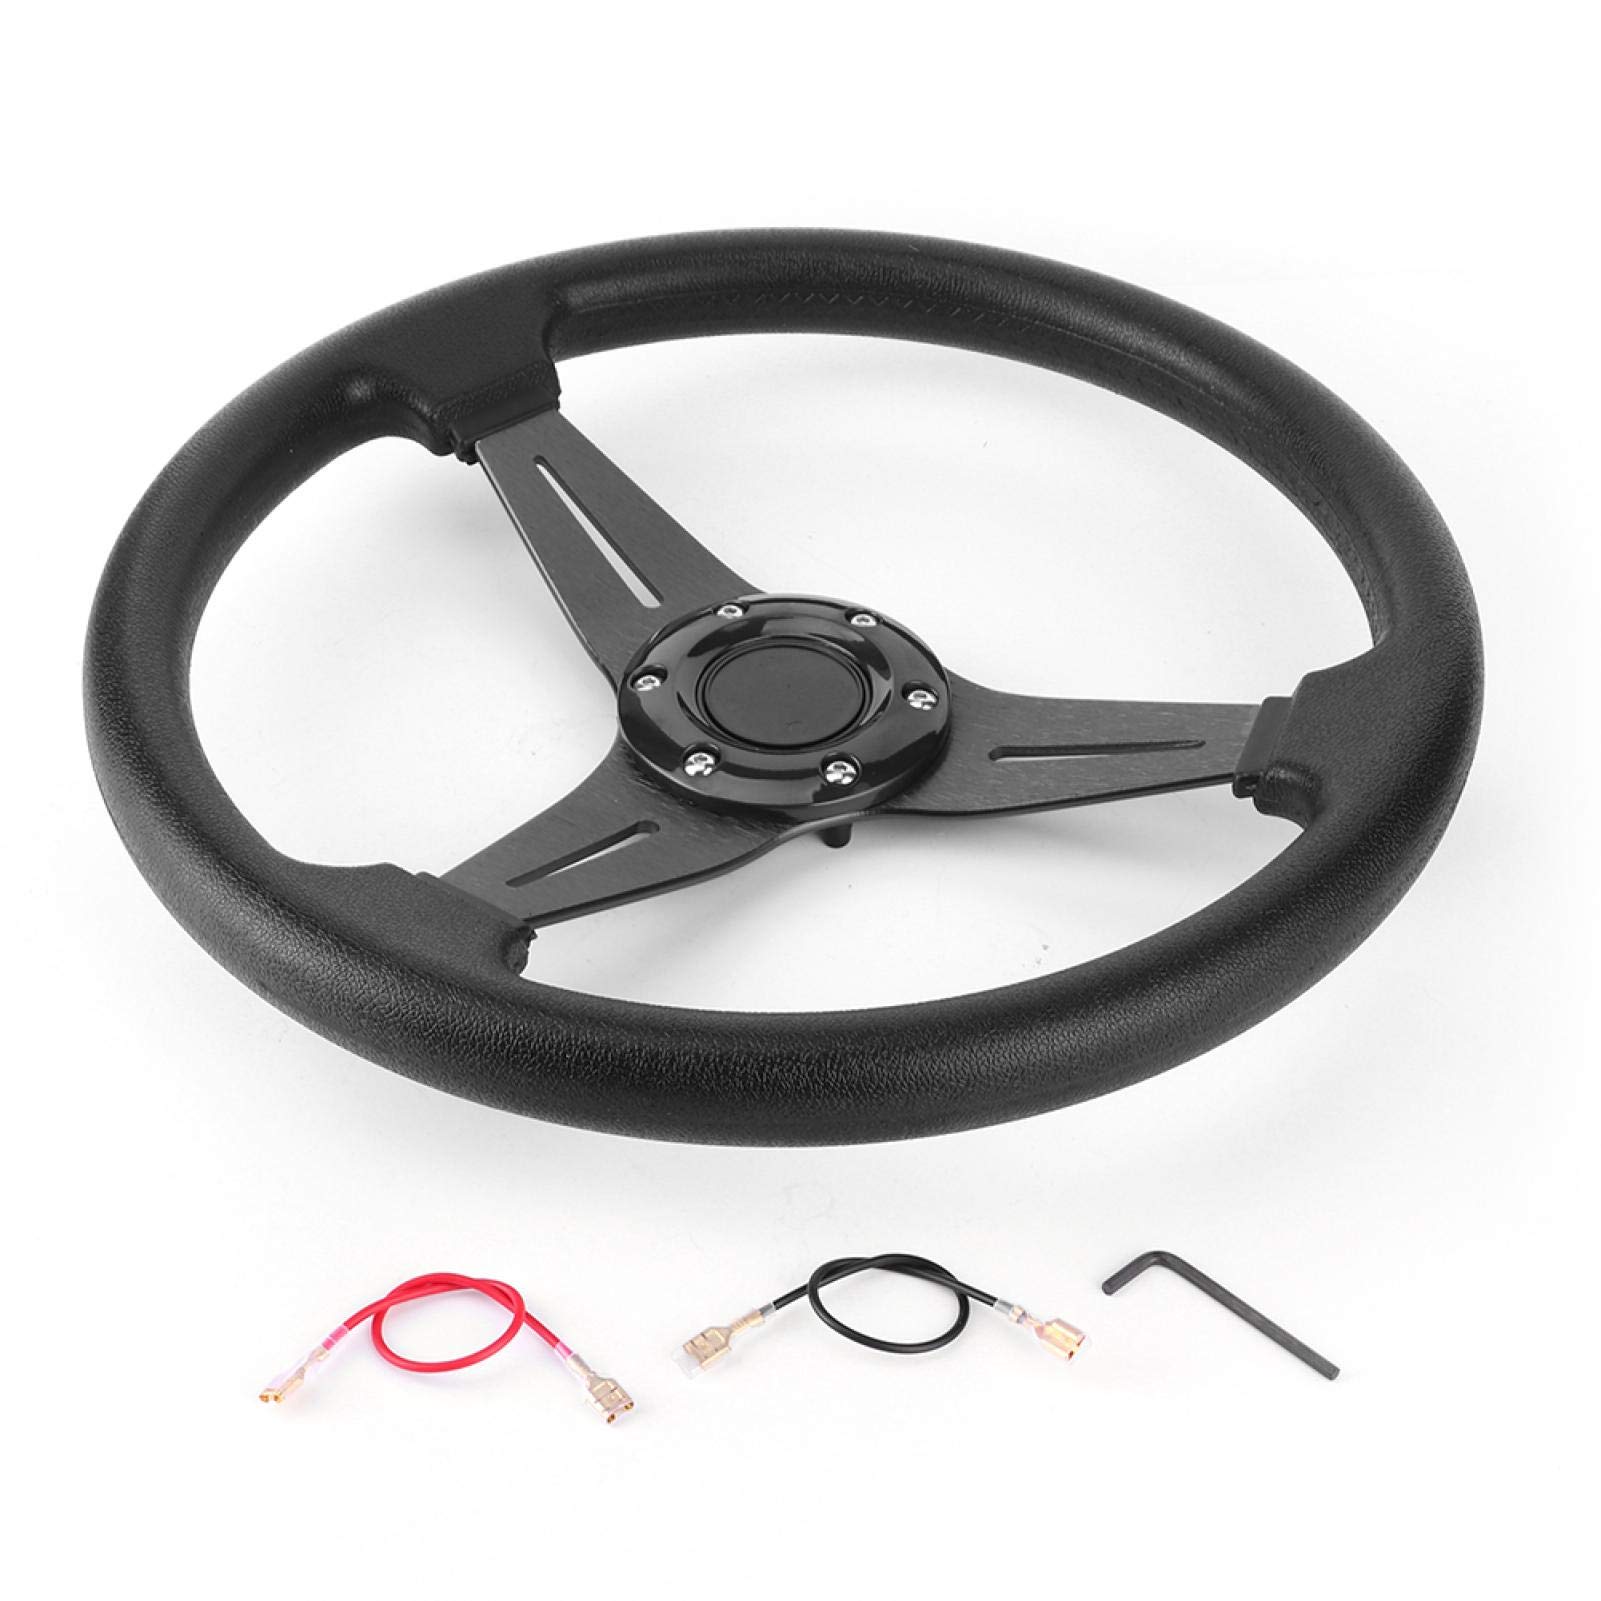 Yctze 350mm/14in Car Steering Wheel,Aluminum Alloy+PU Racing Car Drifting Steering Wheel Replacement Universal Modified Accessory (Black) von Yctze